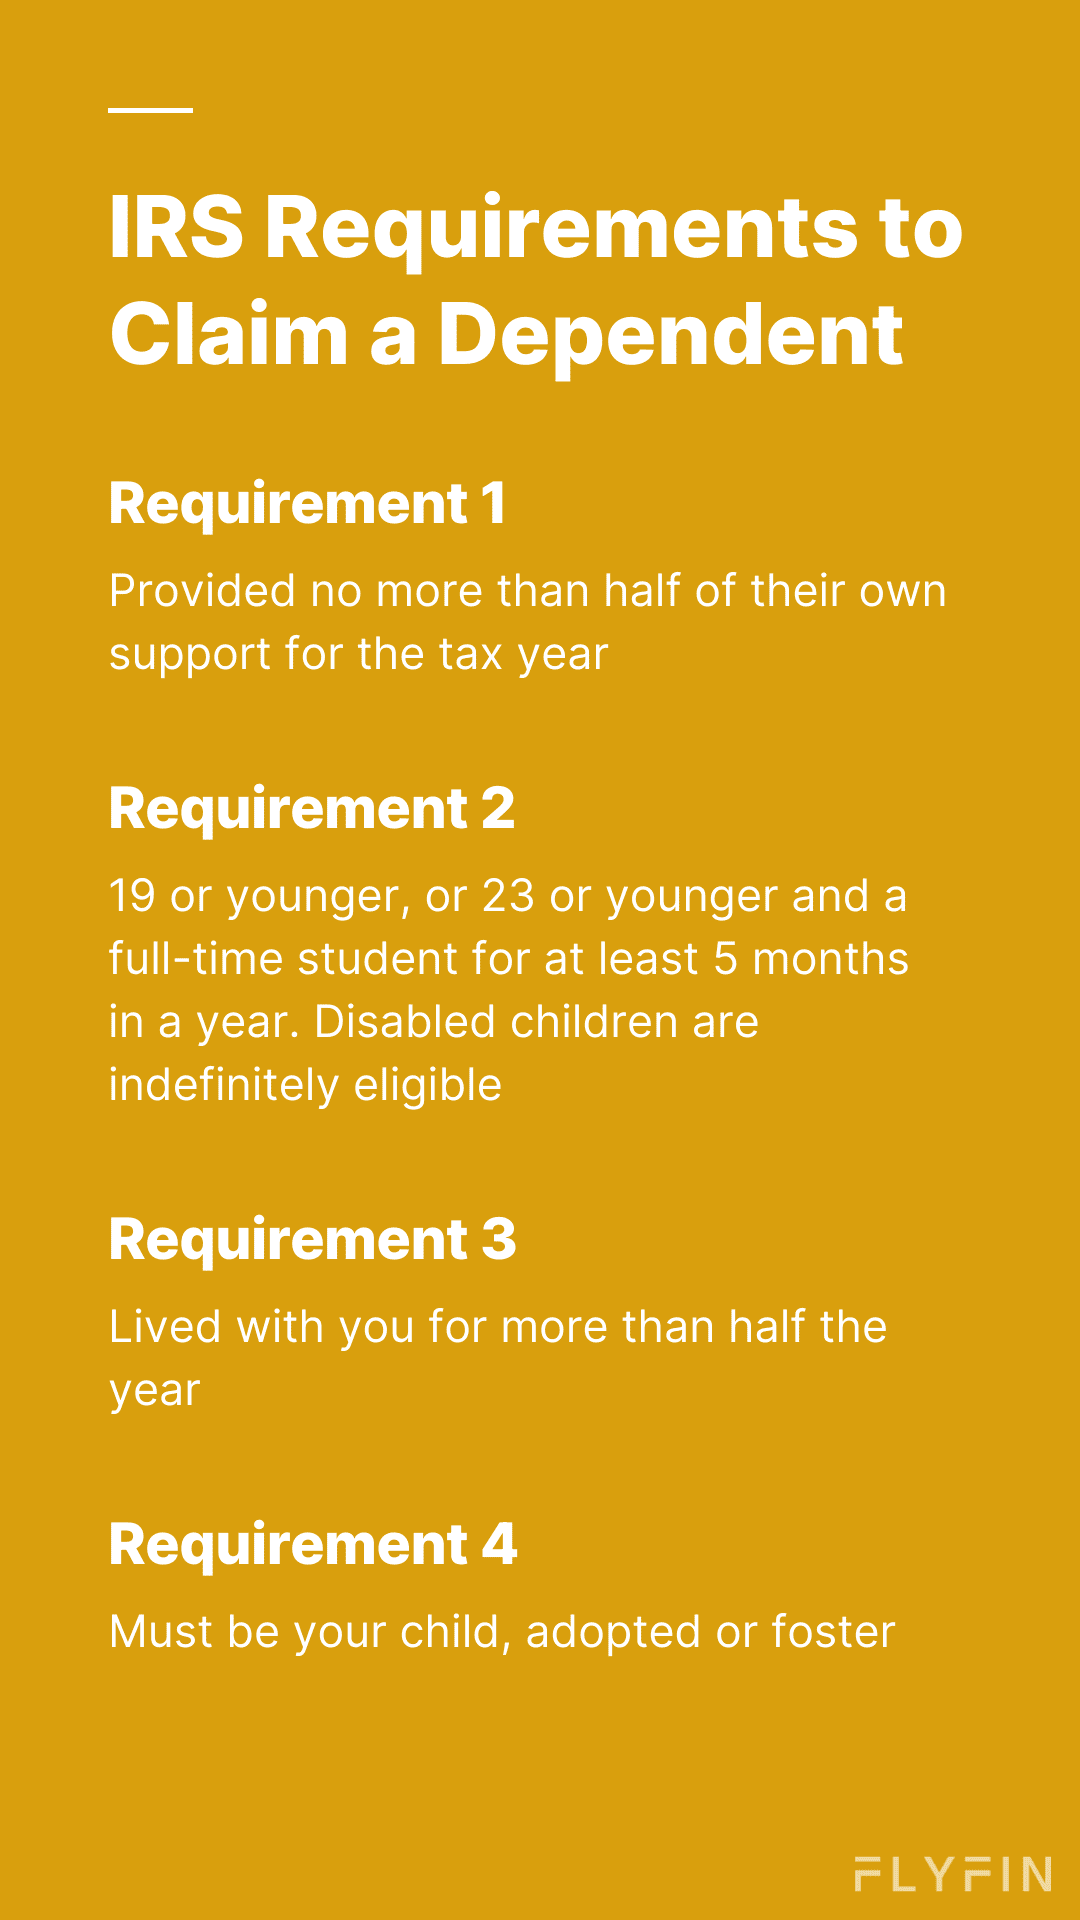 Image outlining IRS requirements to claim a dependent: child must be under 19/23 and a full-time student, lived with you for more than half the year, provided no more than half of their own support, and must be your child, adopted or foster. No mention of self-employment, 1099, freelancer, or taxes.